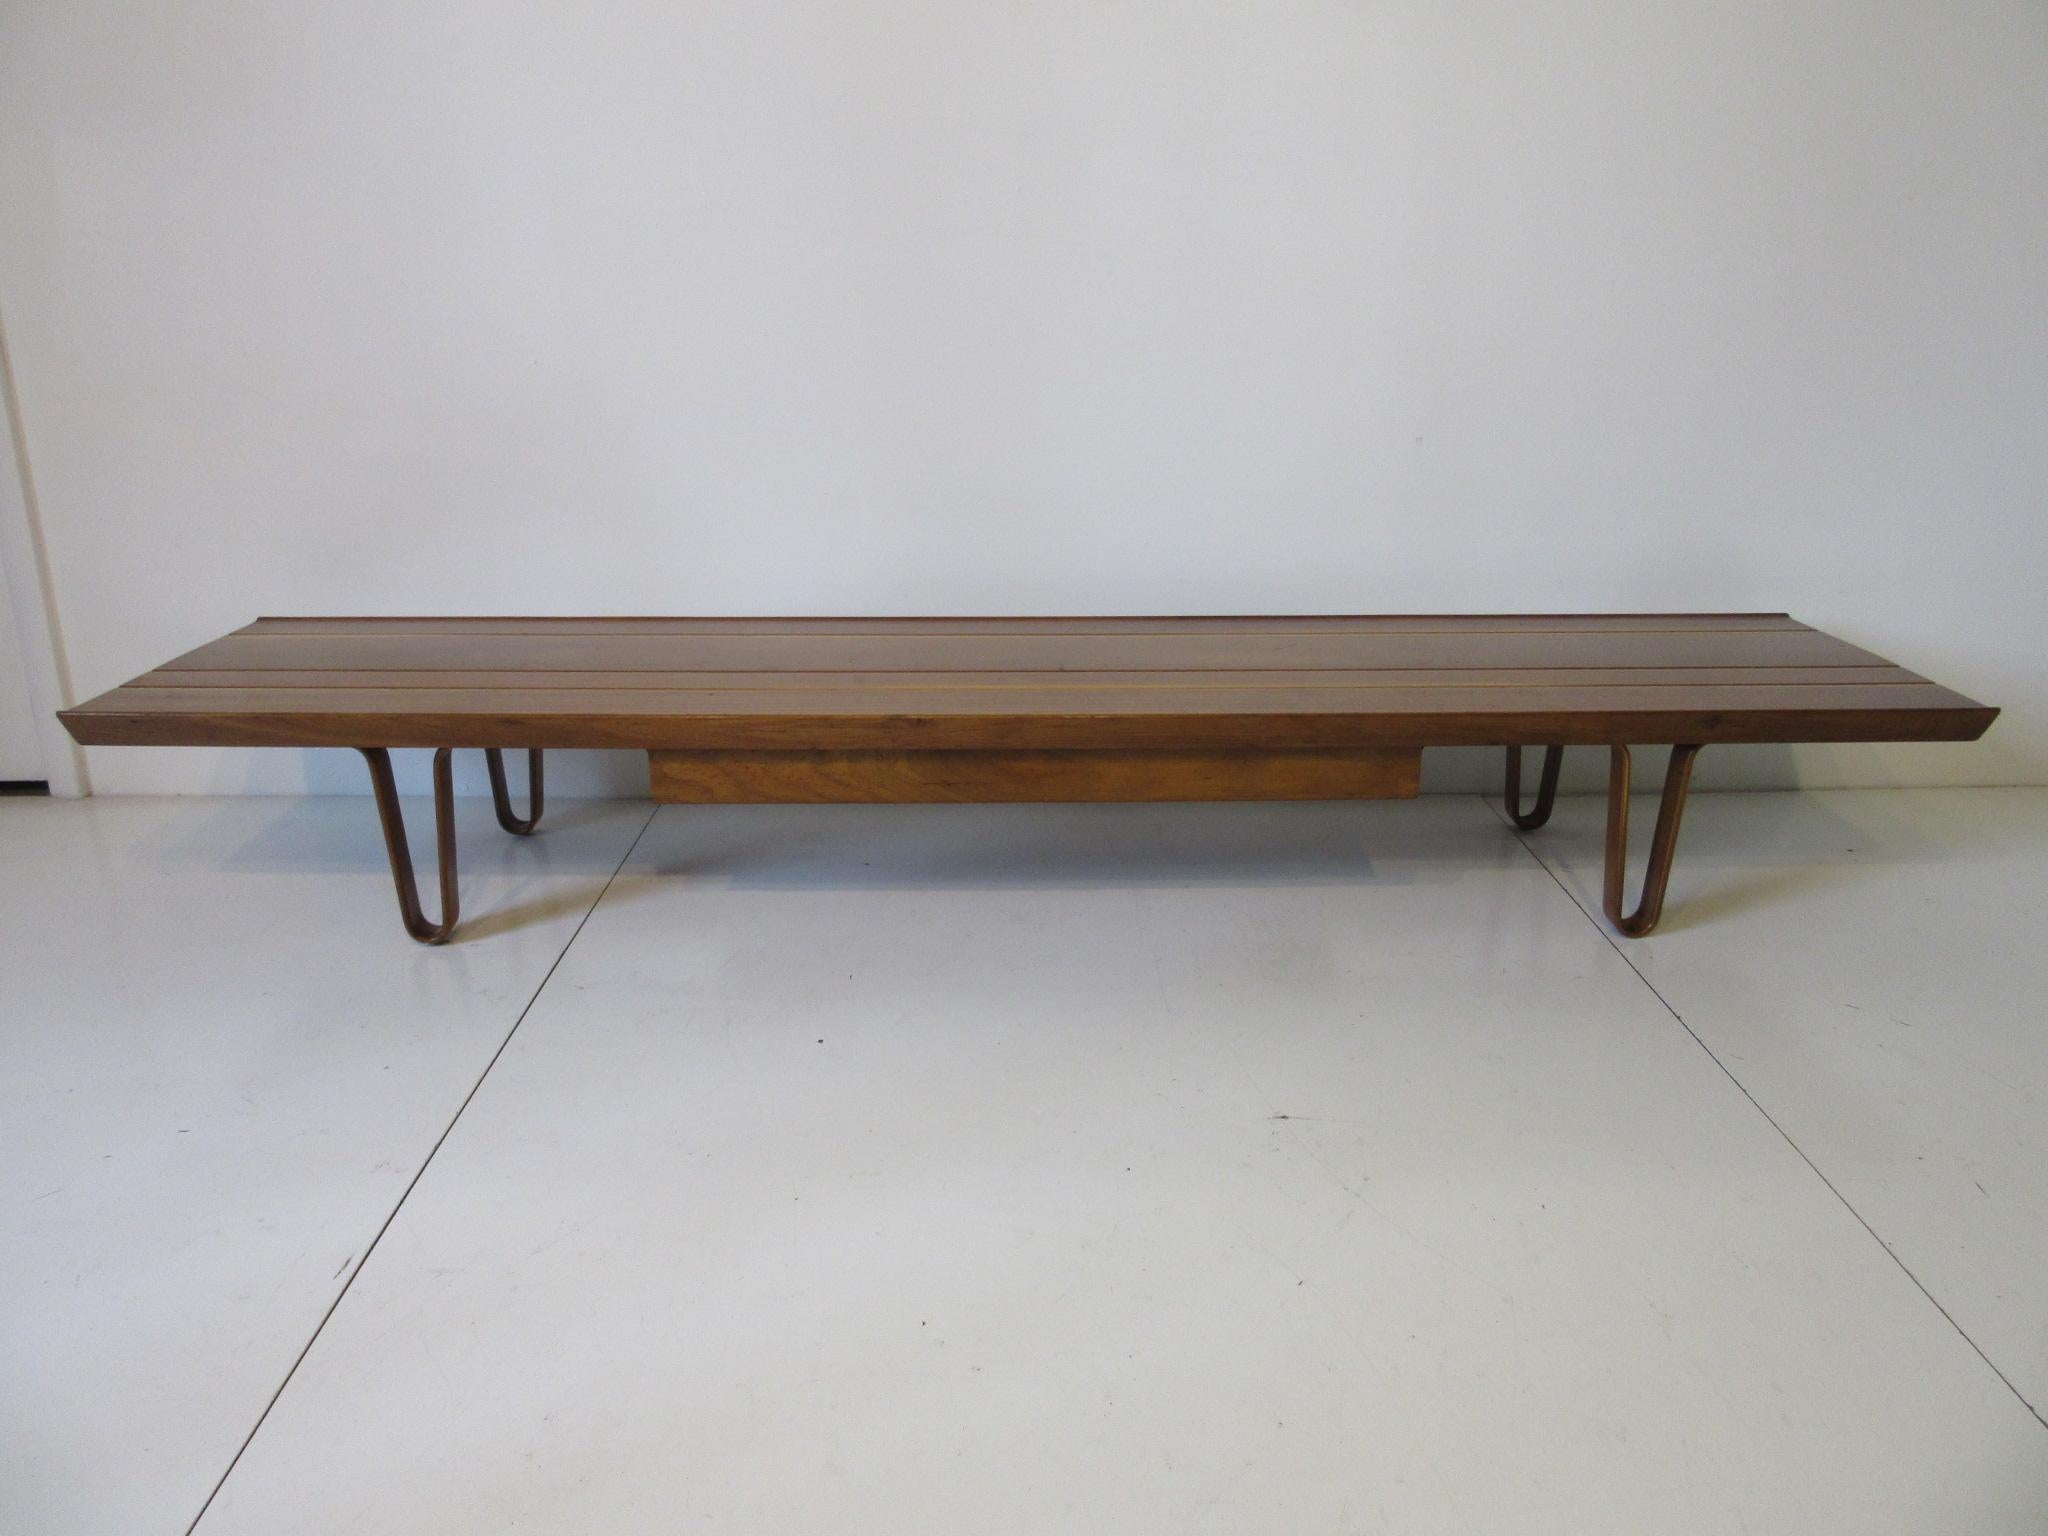 A well grained solid mahogany coffee table with matching wooden hairpin legs and a pull-out drawer one of Edward Wormley's best designs. Retains the gold tone metal tag manufactured by the Dunbar Furniture Company.